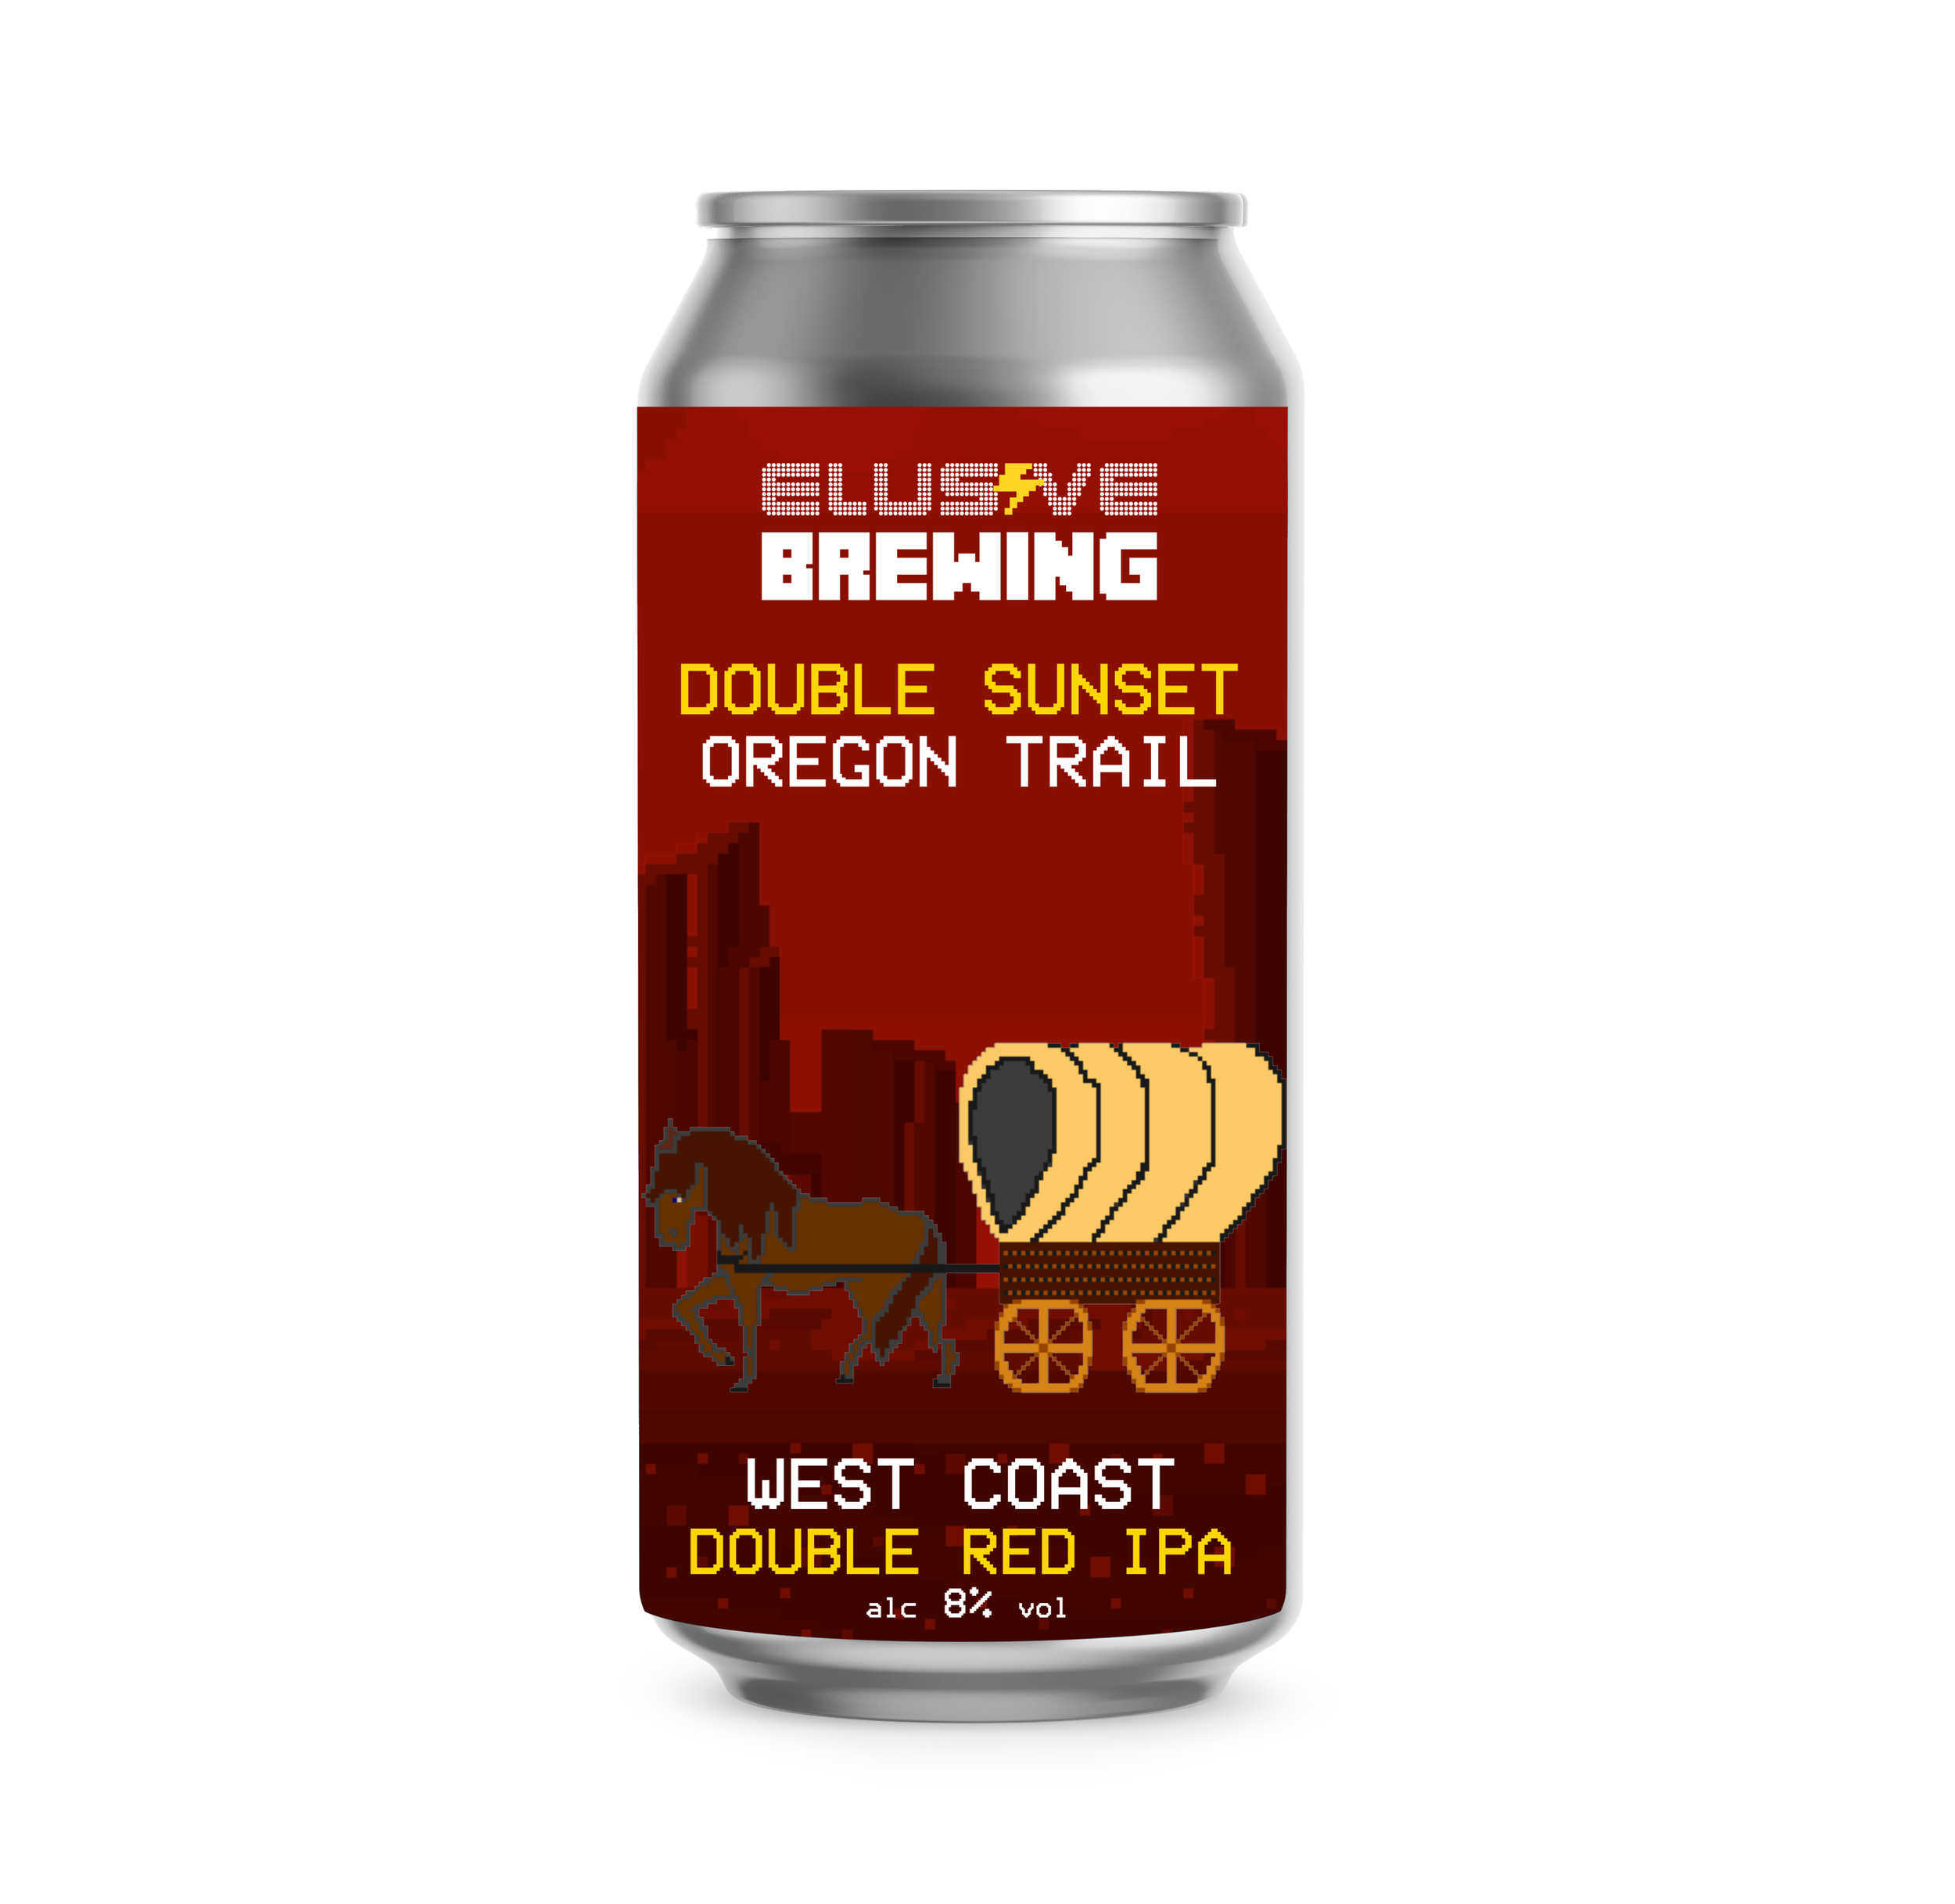 Elusive Brewing - Double Sunset Oregon Trail 8% West Coast Double Red IPA - Elusive Brewing